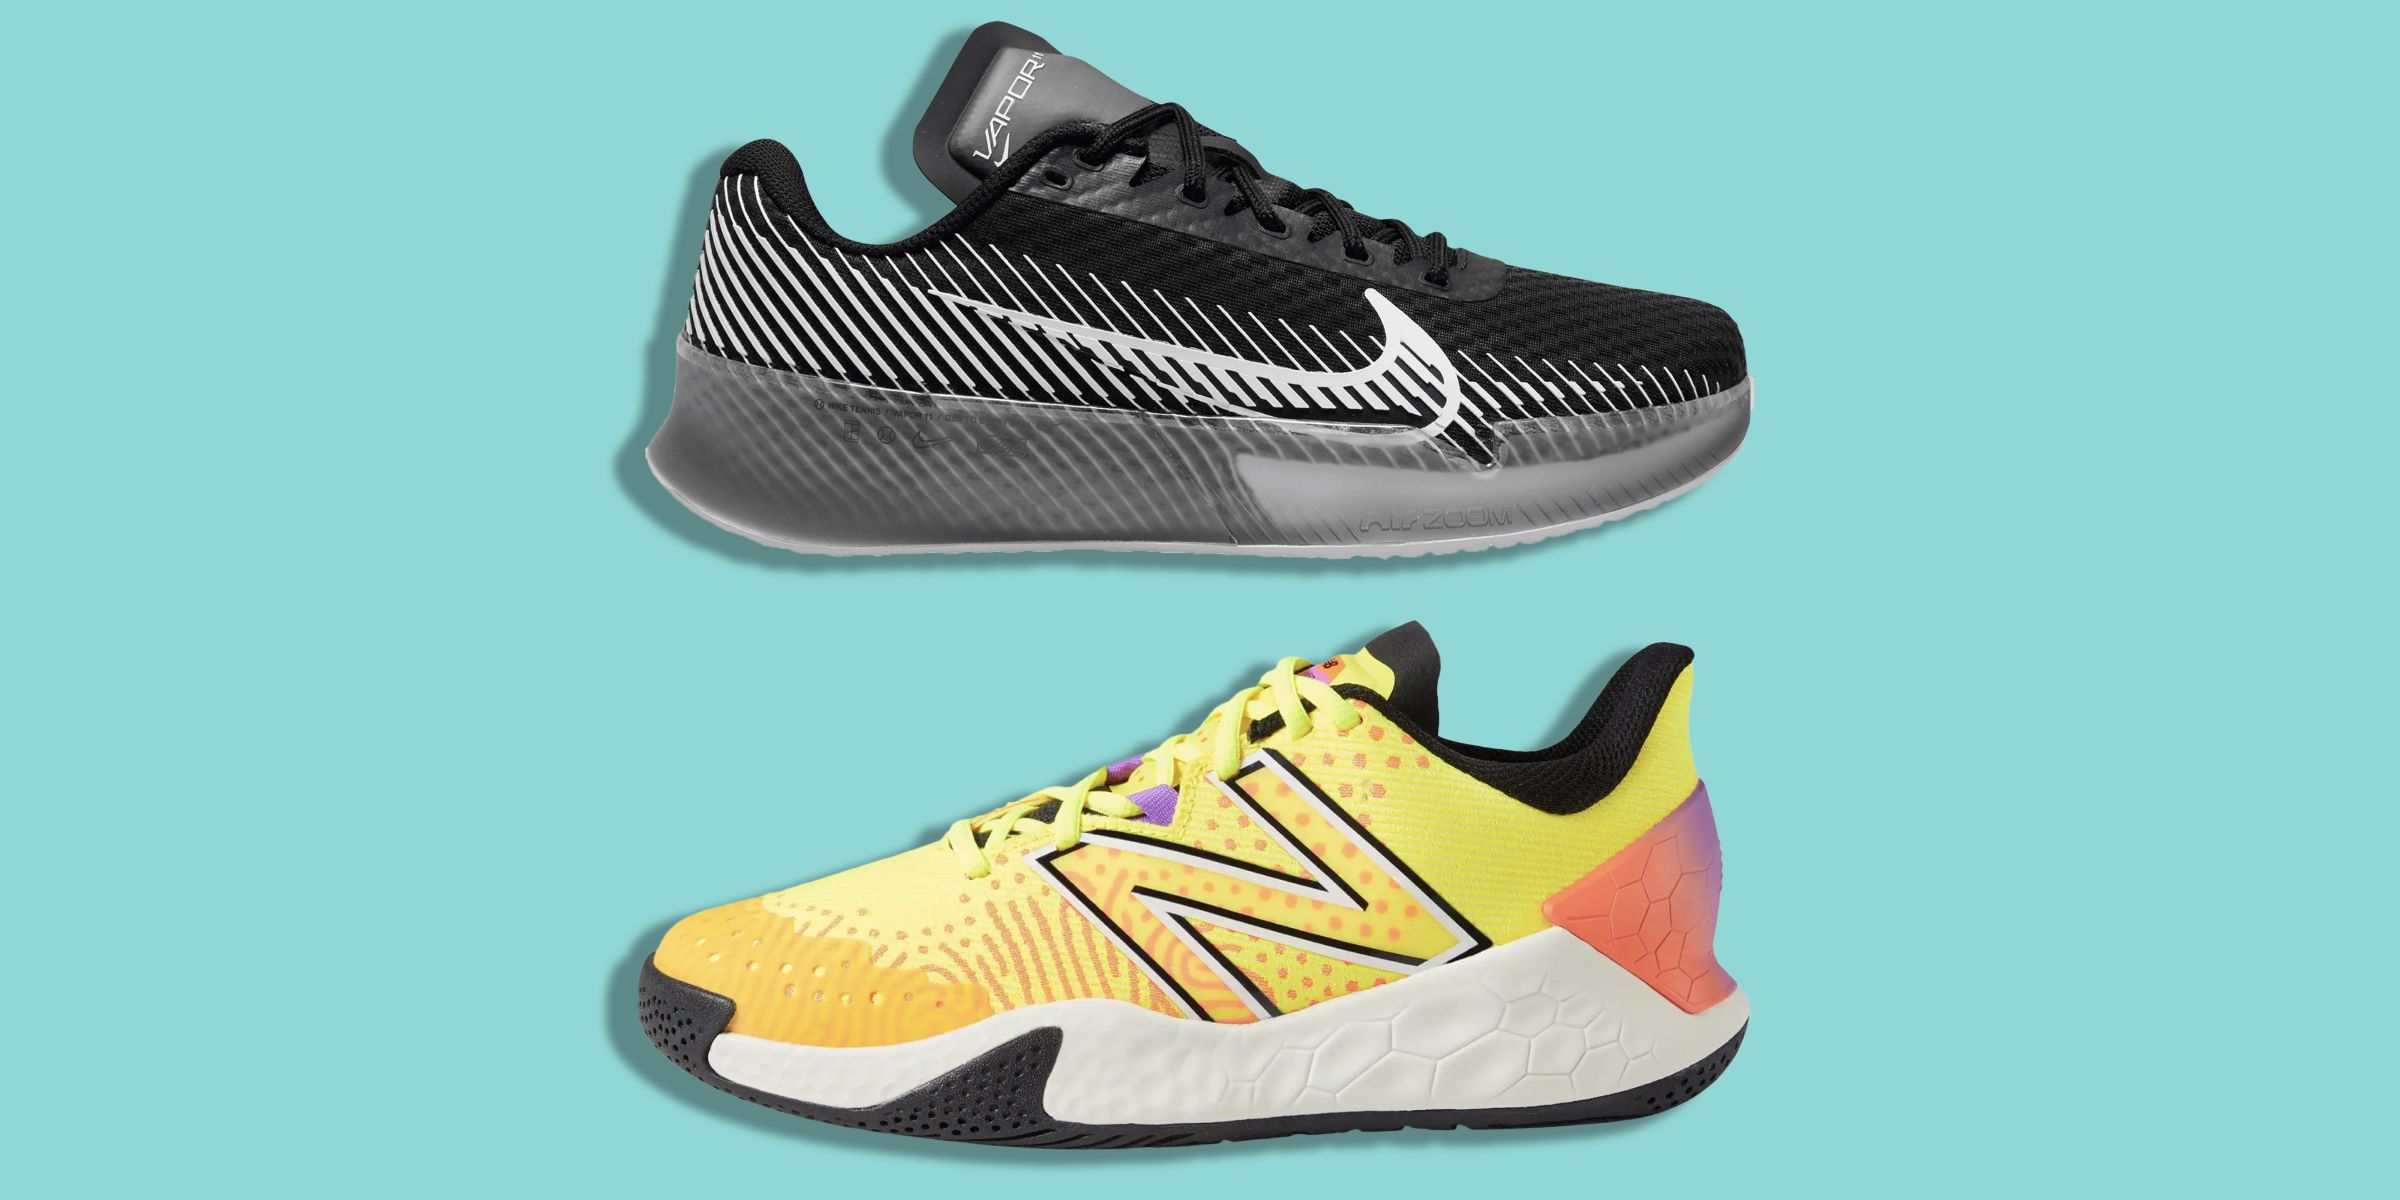 The Surprising Similarities Between Tennis And Pickleball Shoes